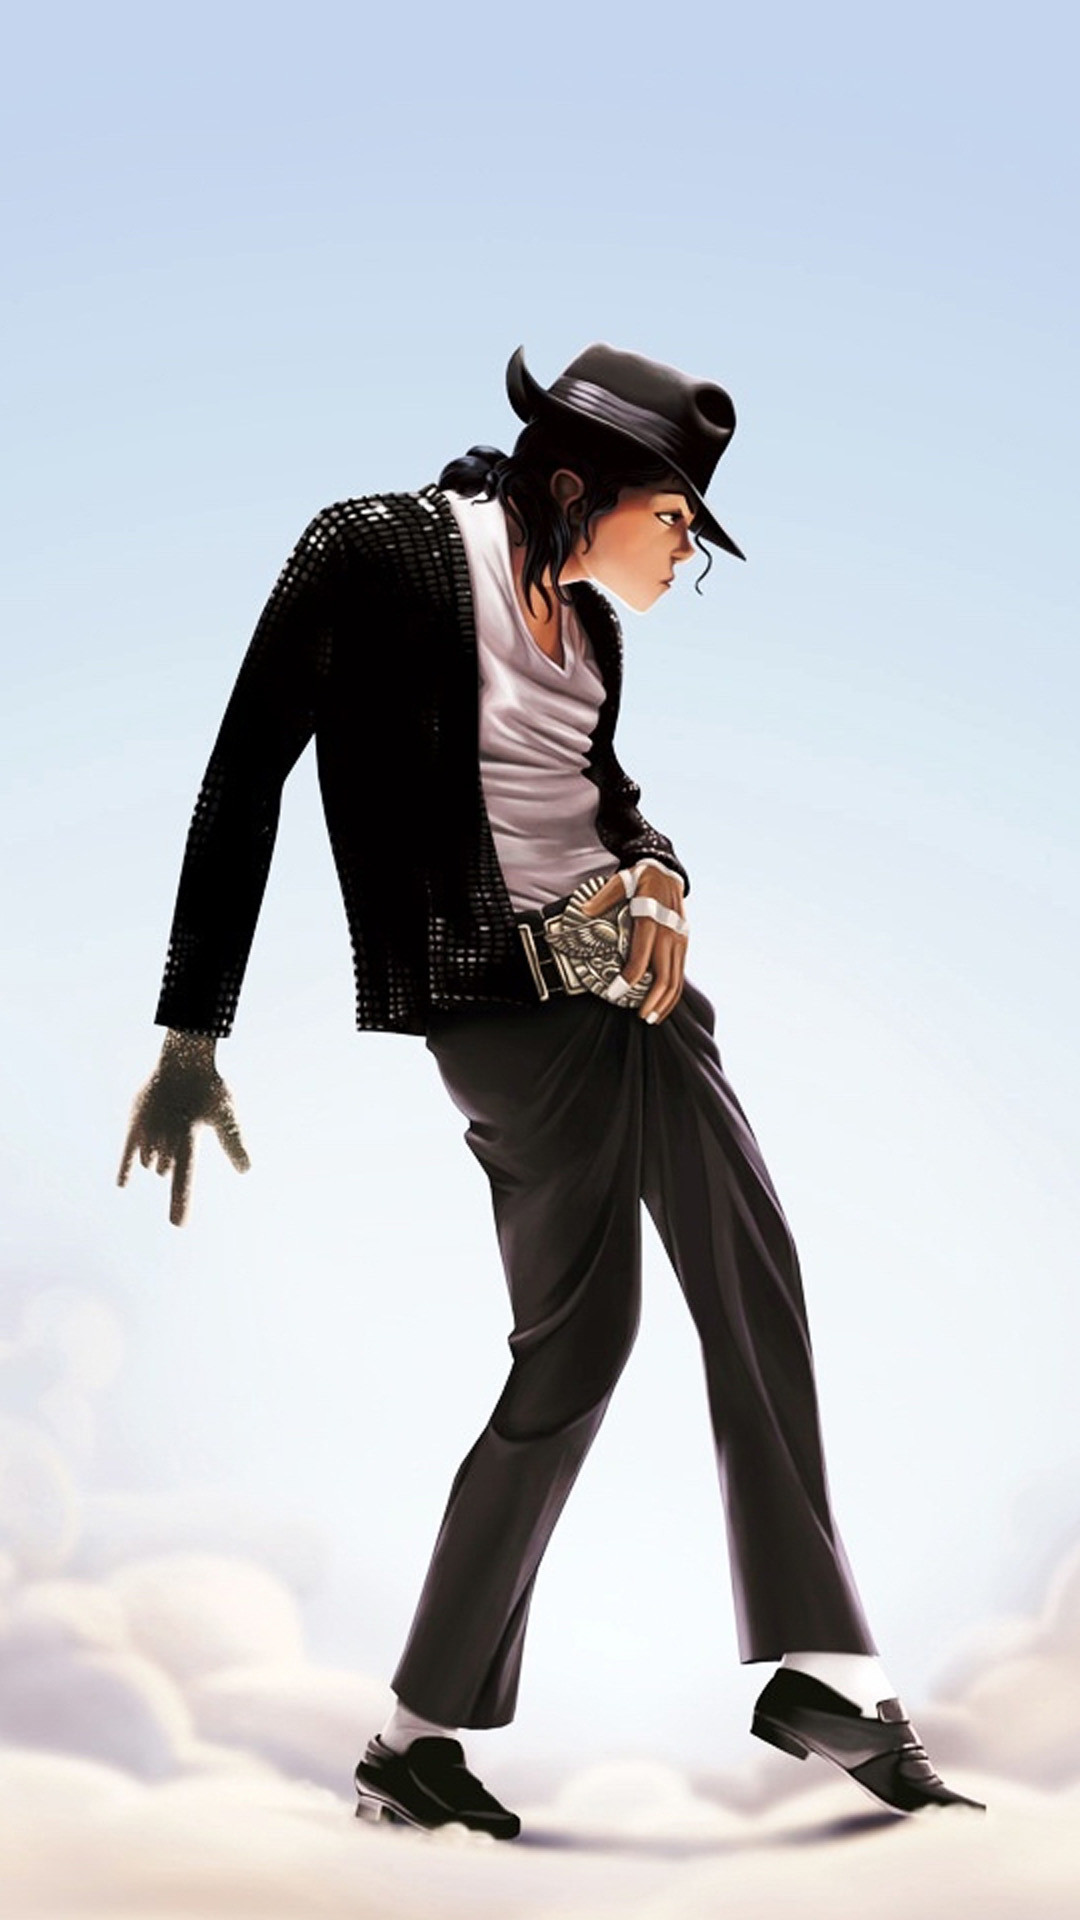 1080x1920 Art of mj Wallpapers for Galaxy S5